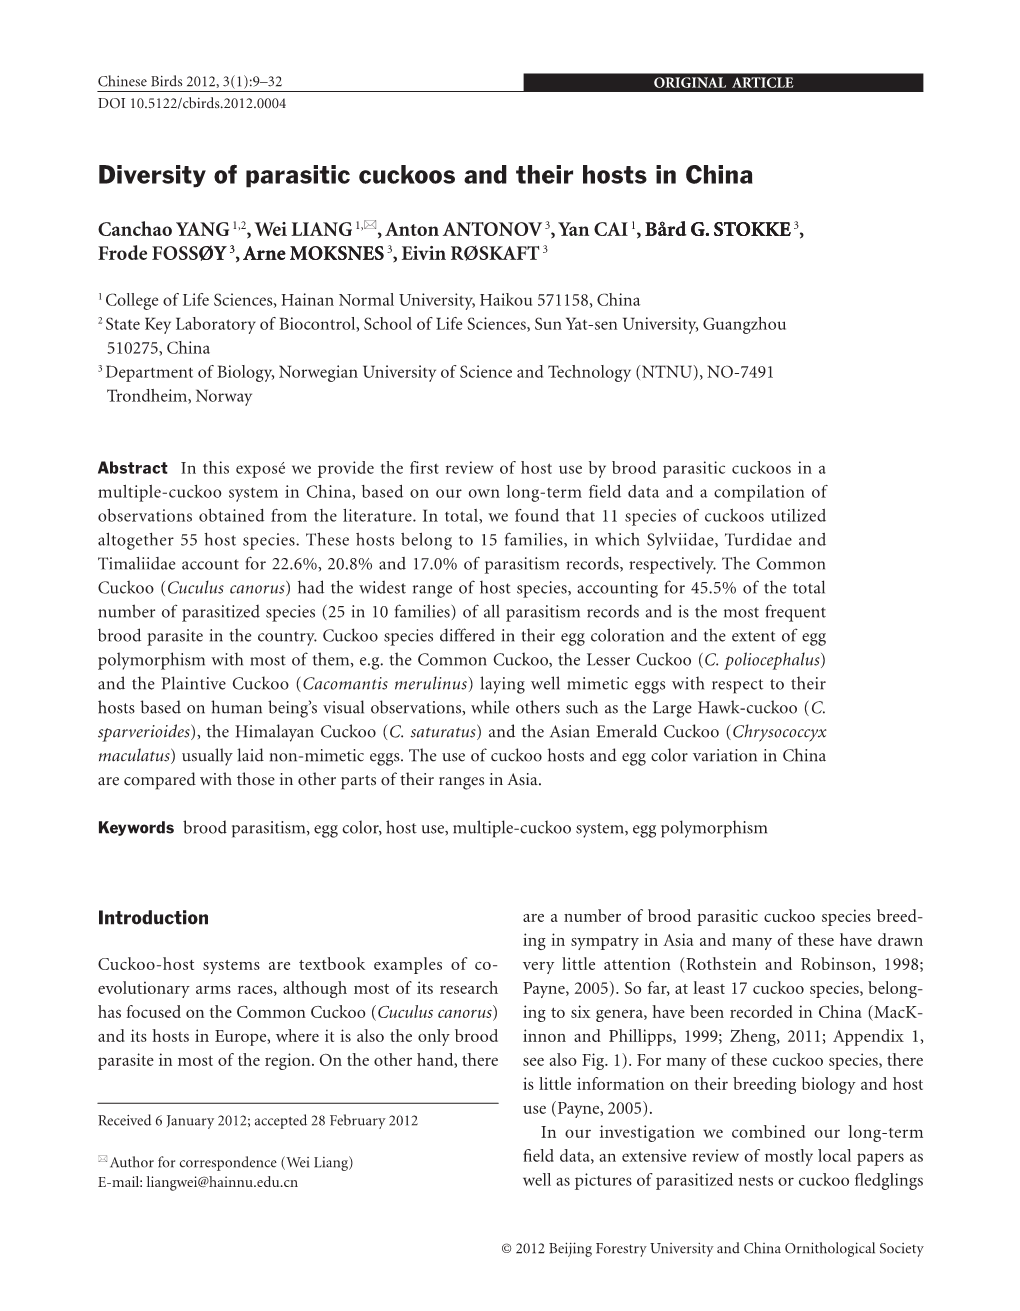 Diversity of Parasitic Cuckoos and Their Hosts in China